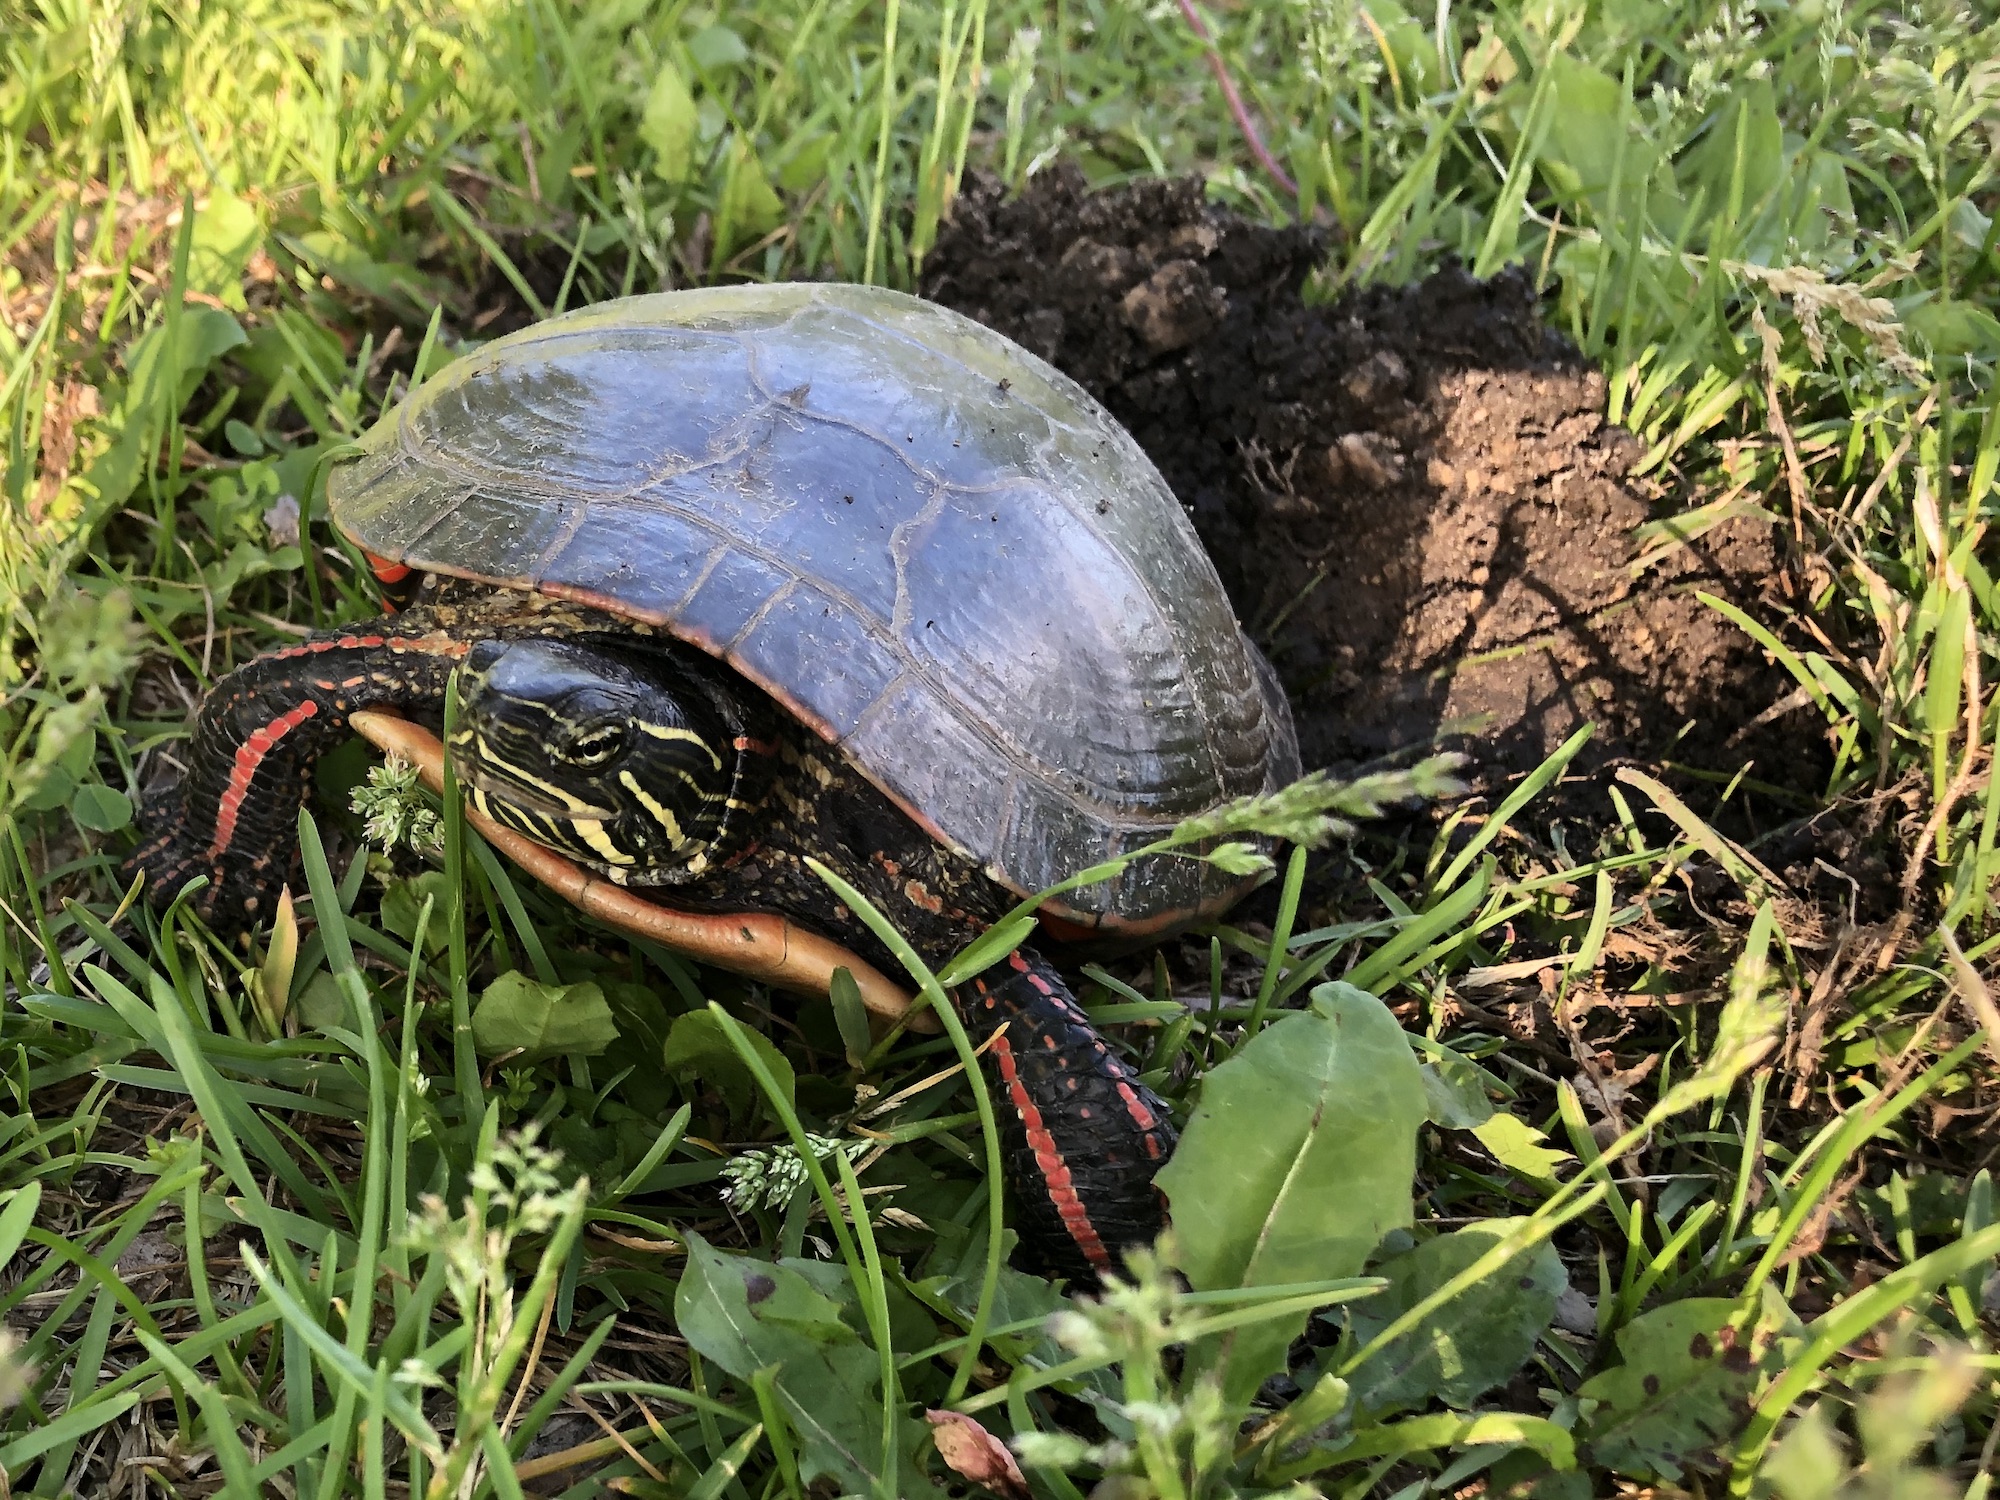 Painted Turtle laying eggs in E. Ray Stevens Aquatic Gardens in Madison, Wisconsin on June 9, 2022.